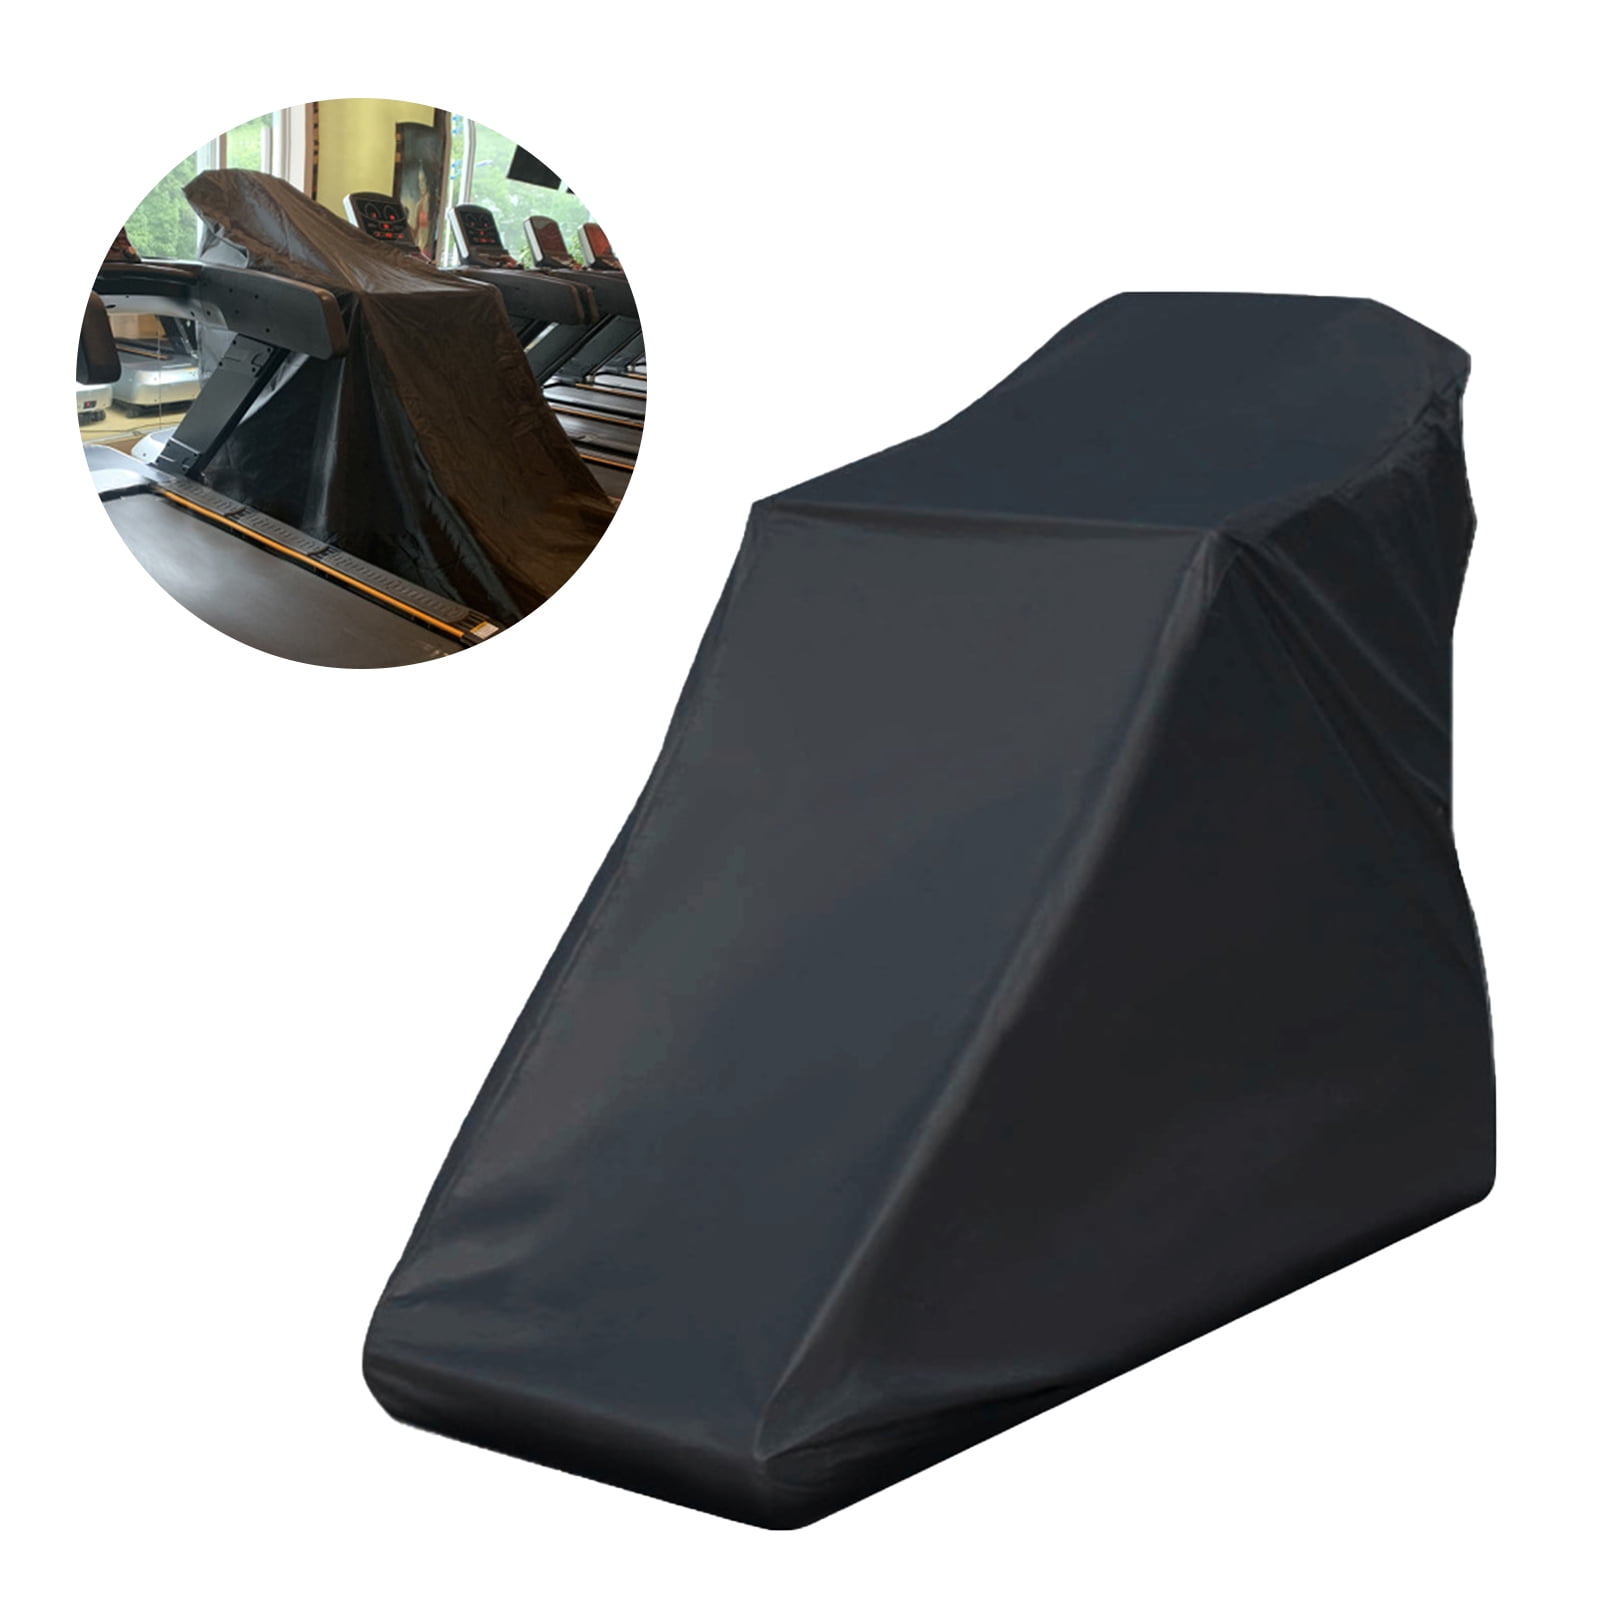 Details about   Waterproof Treadmill Cover Running Jogging Machine Dustproof Shelter  H SU 